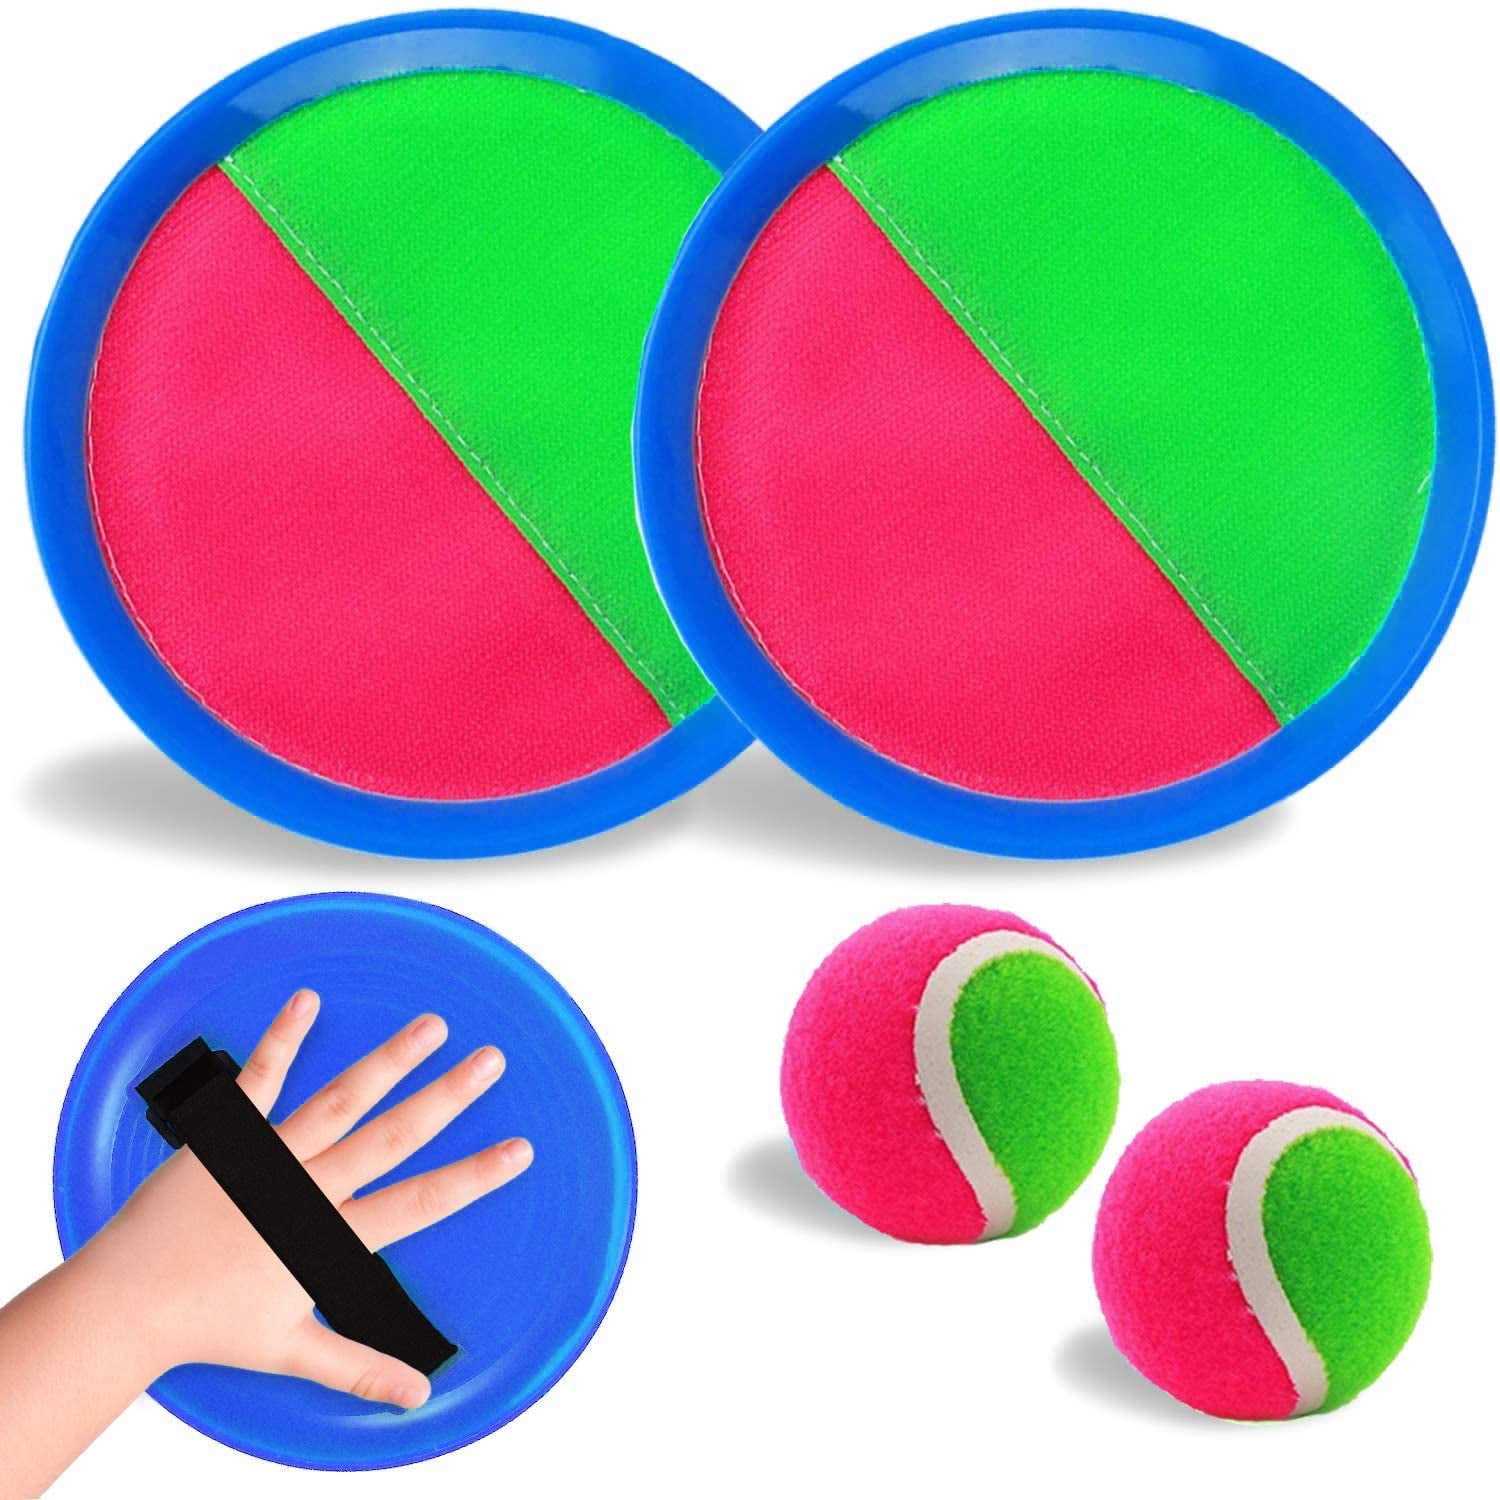 4 Set Garden Beach Toss Throw Catch Scoops Ball Game Toy Set Party Family 